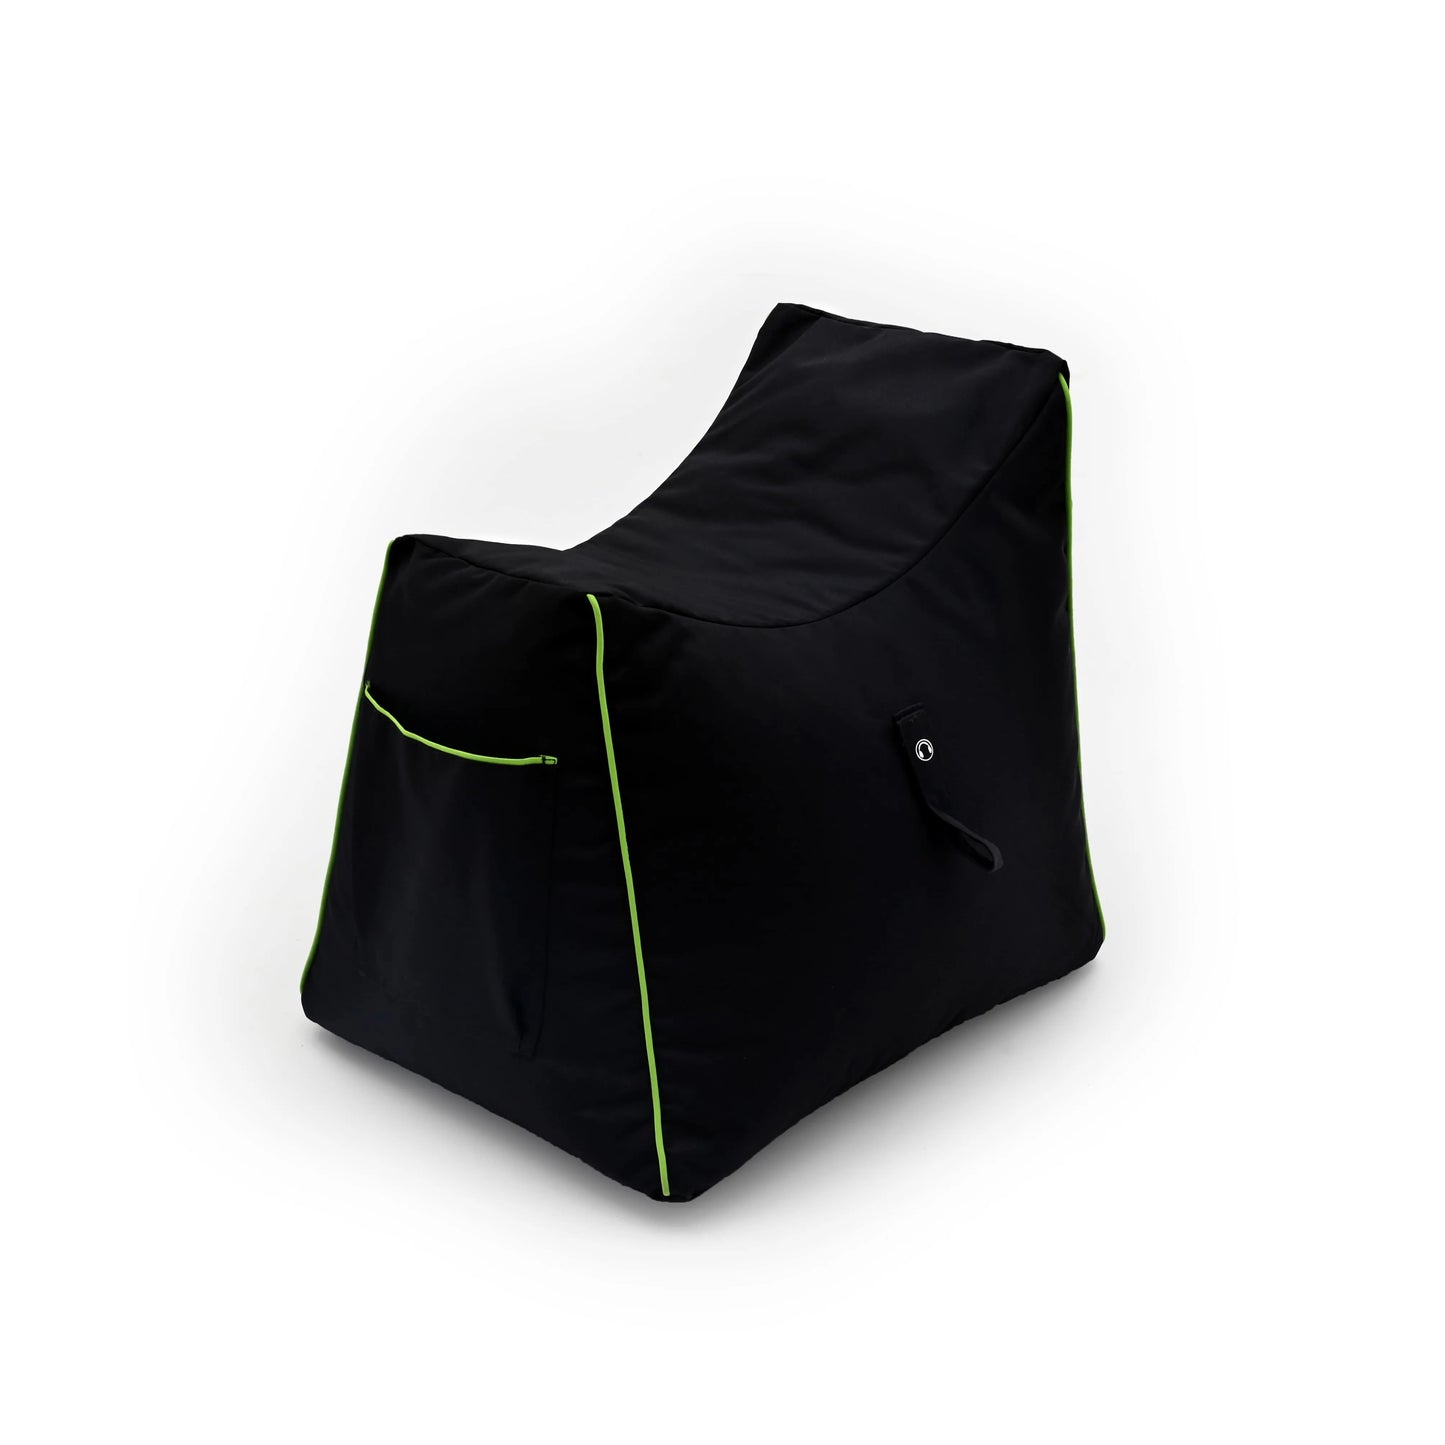 A black beanbag chair with green trim on a white background.